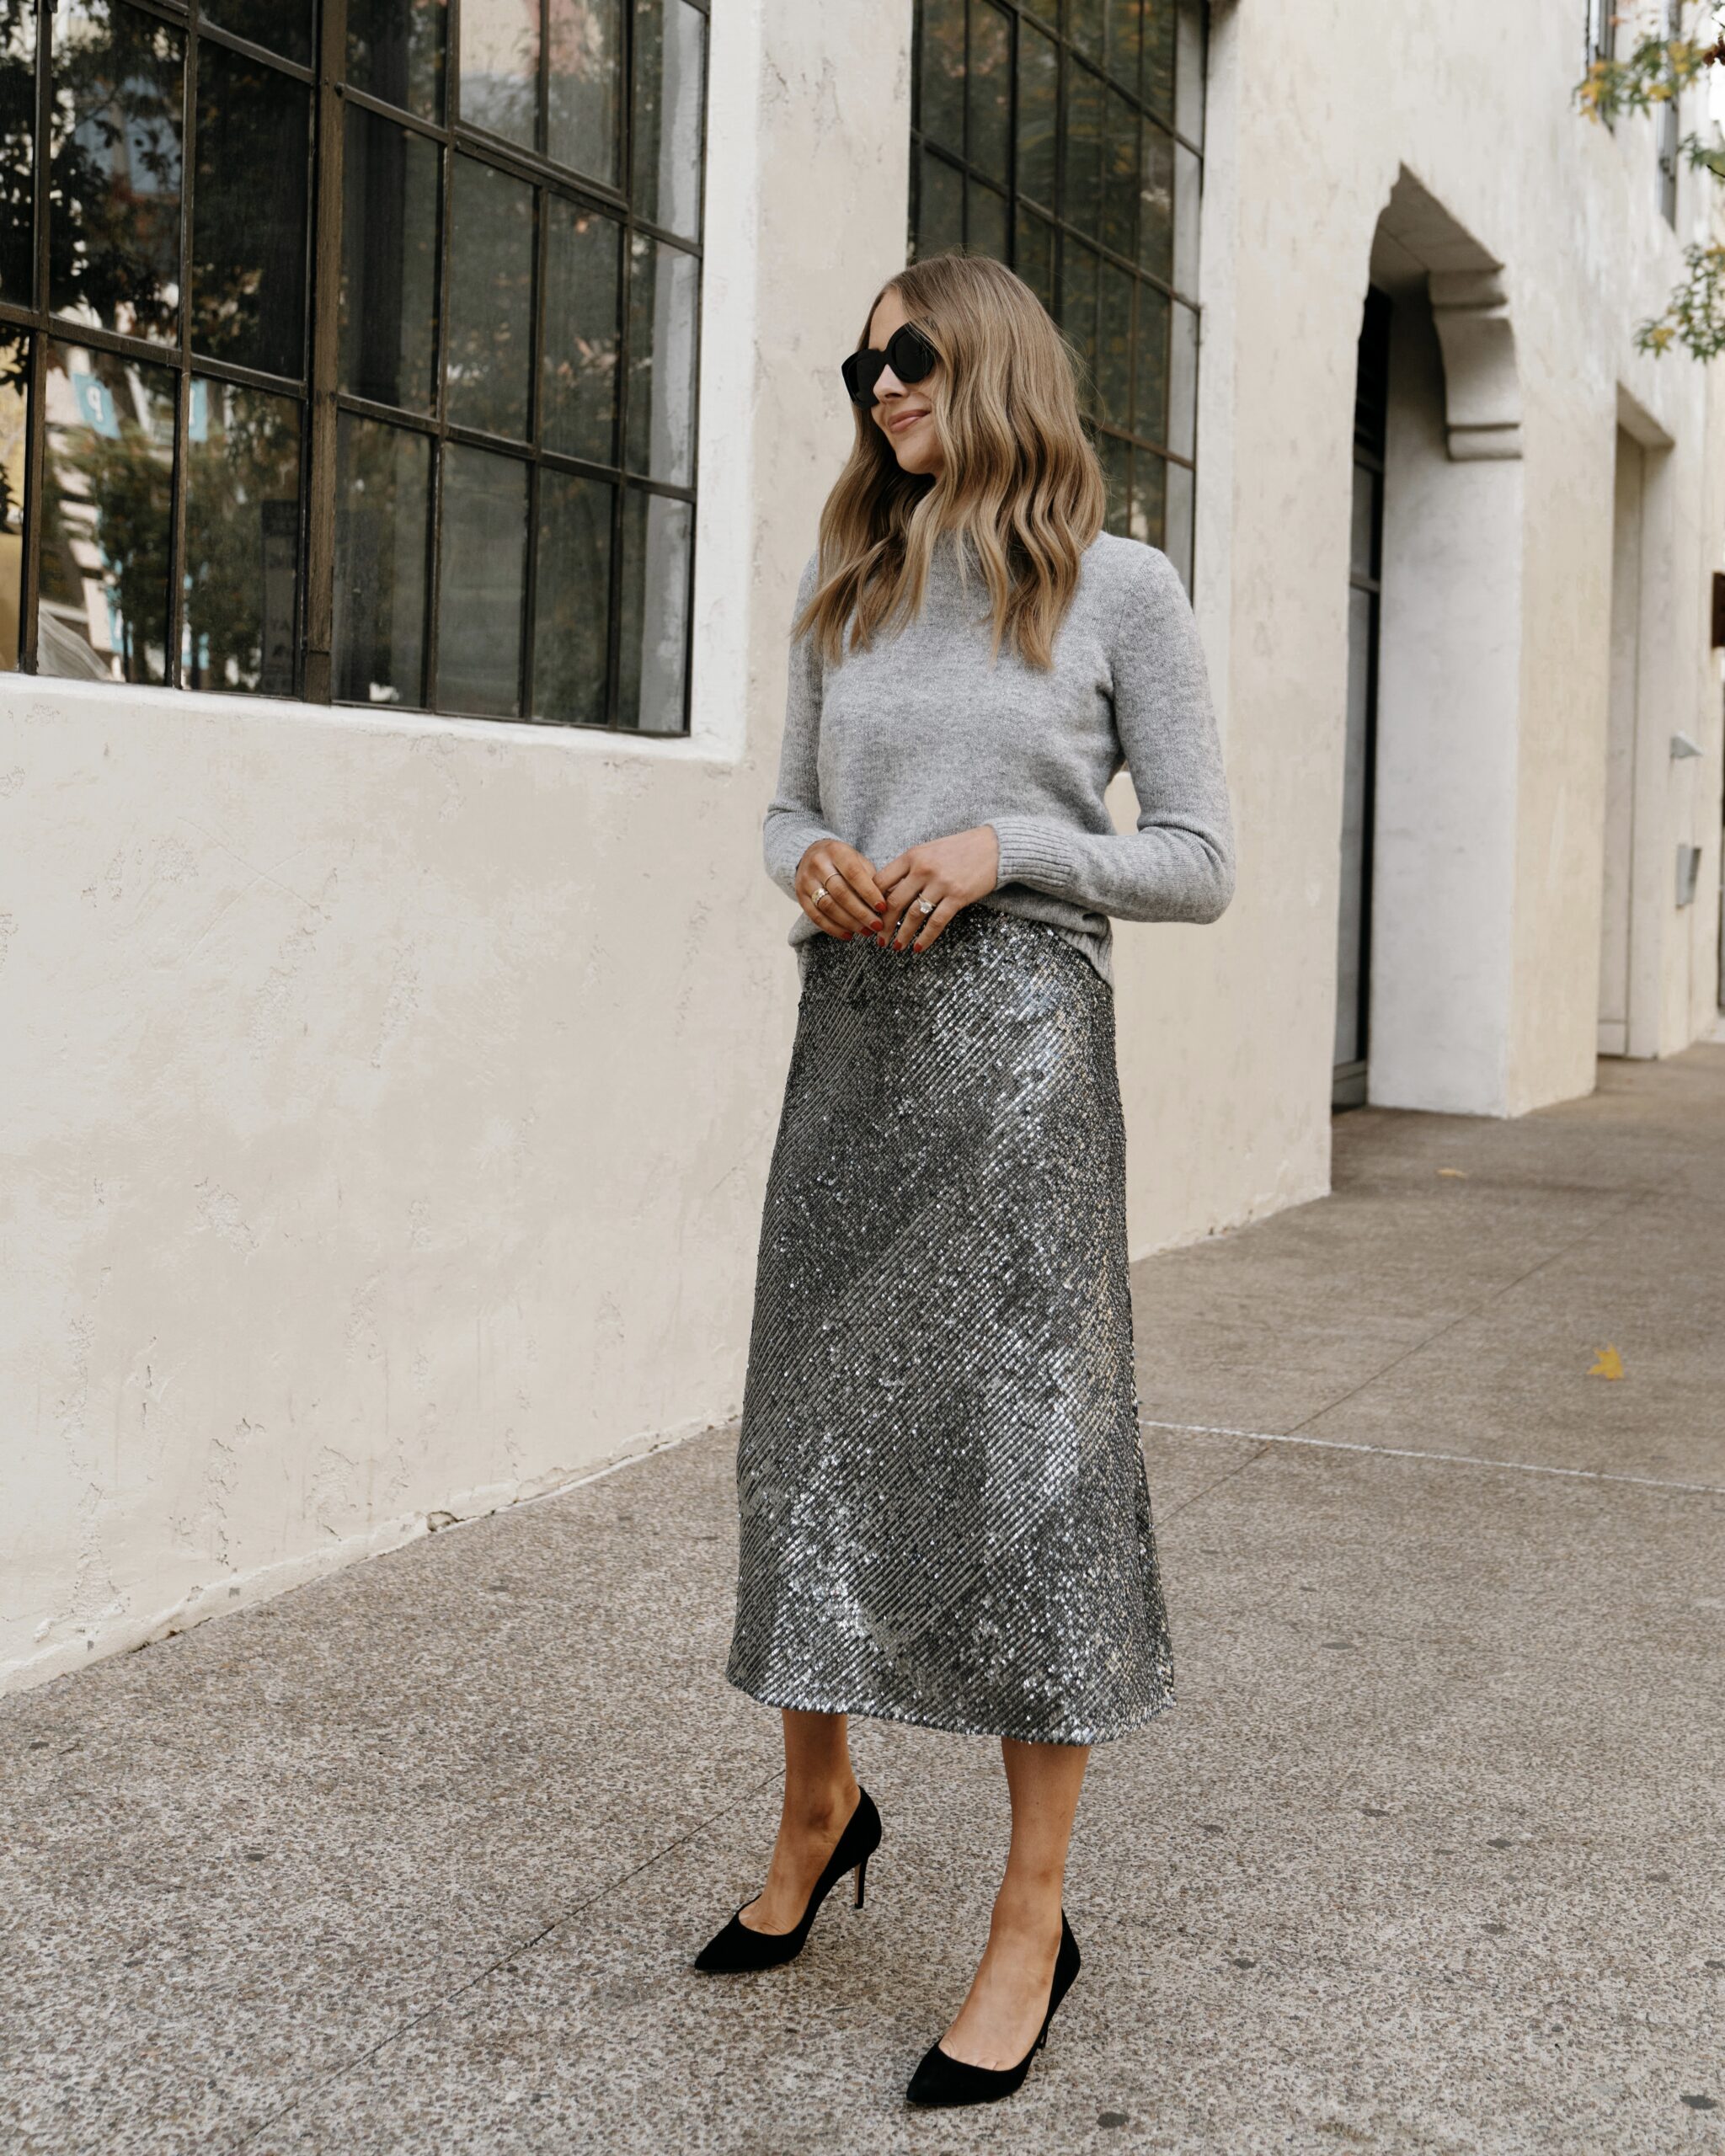 Fashion Jackson Wearing Grey Sweater Silver Sequin Skirt Black Pumps Holiday Outfit